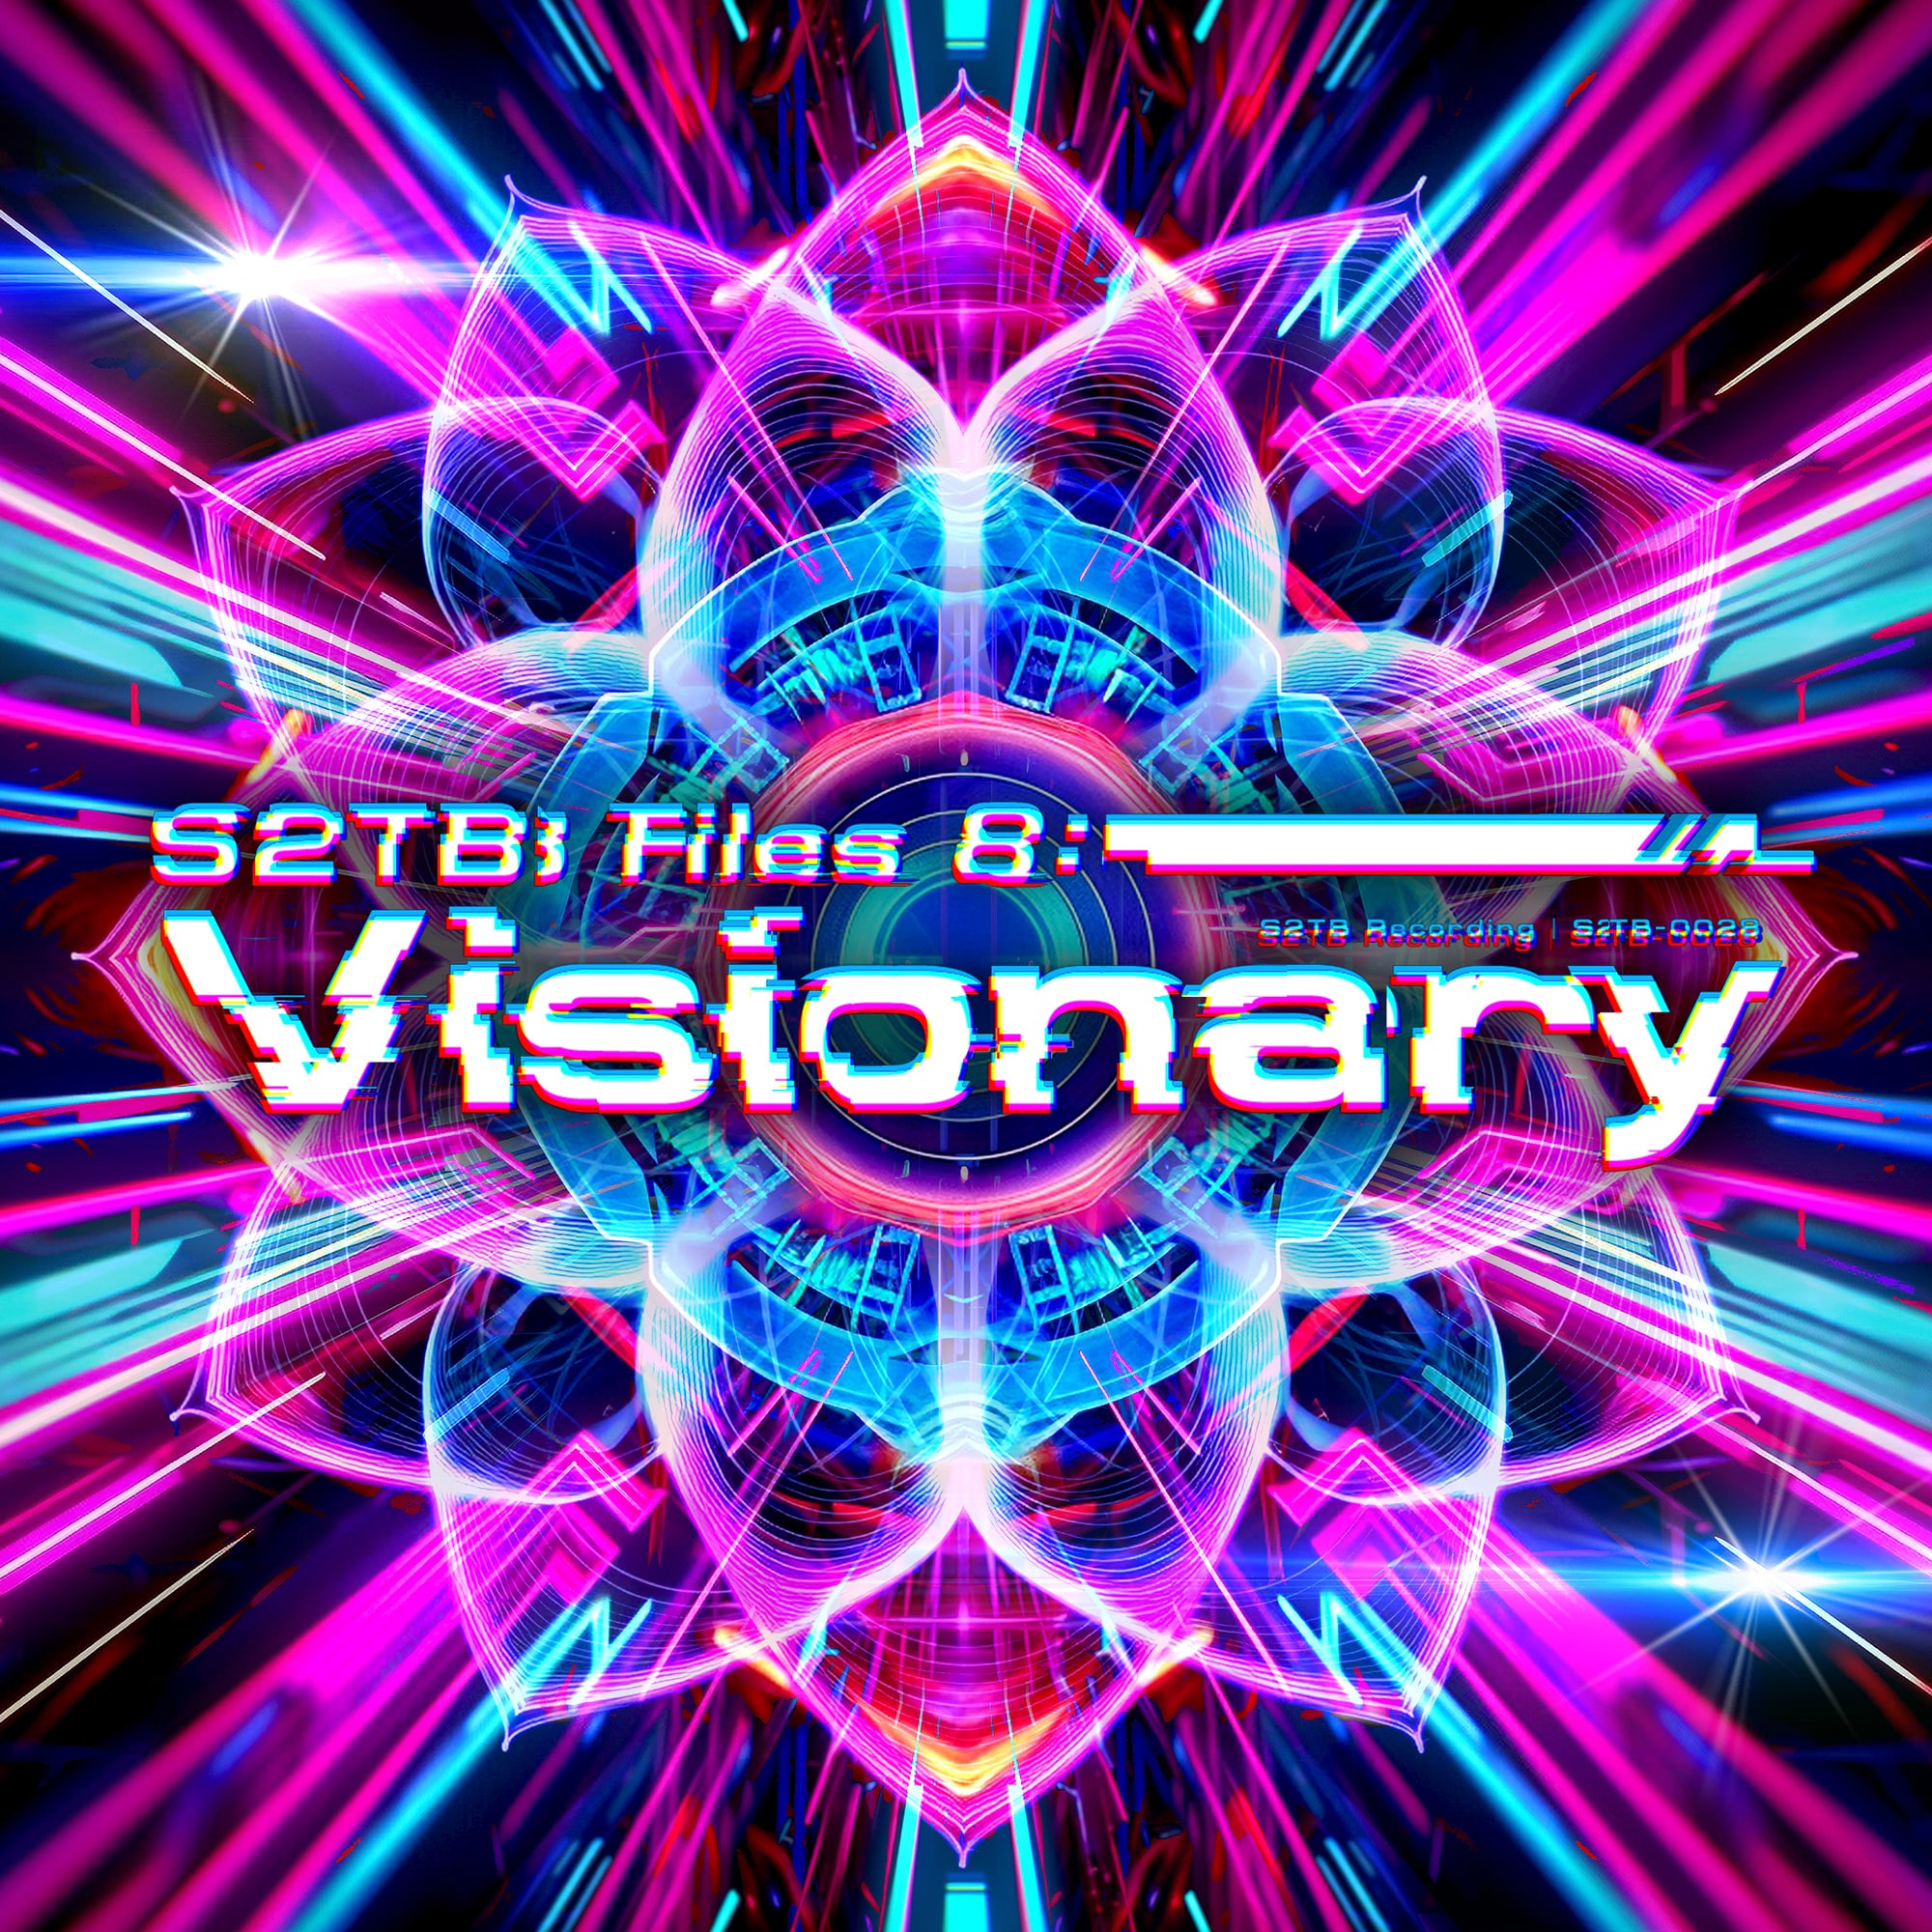 S2TB Files8:Visionary